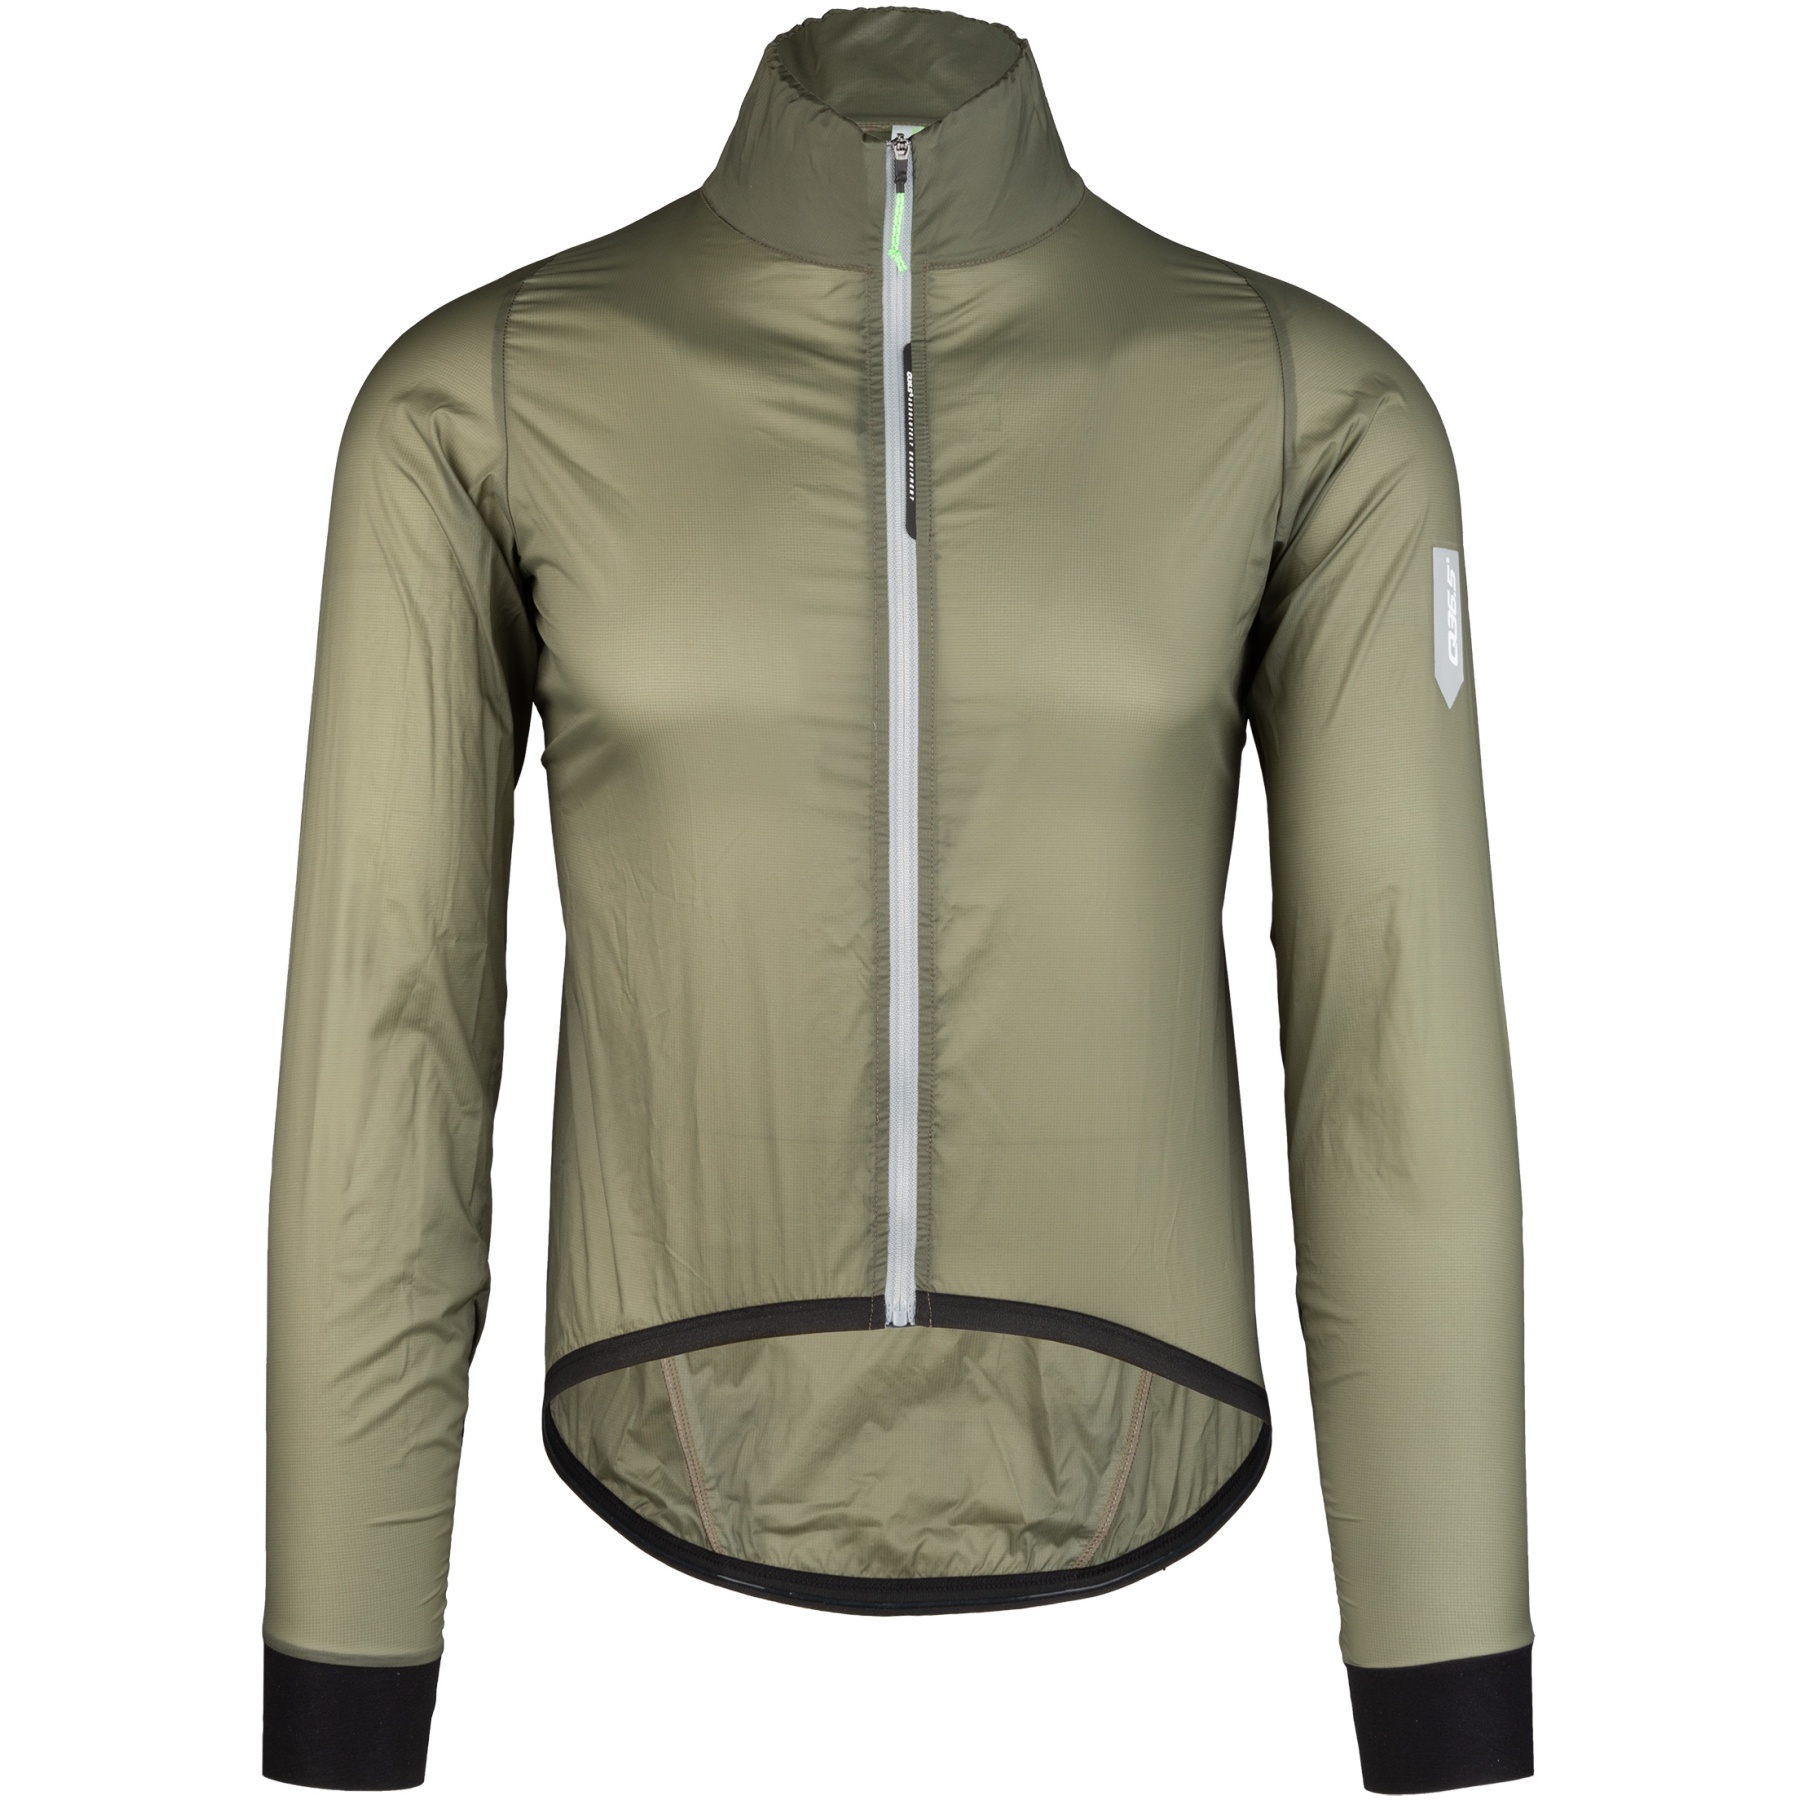 Picture of Q36.5 Air Shell Jacket - olive green